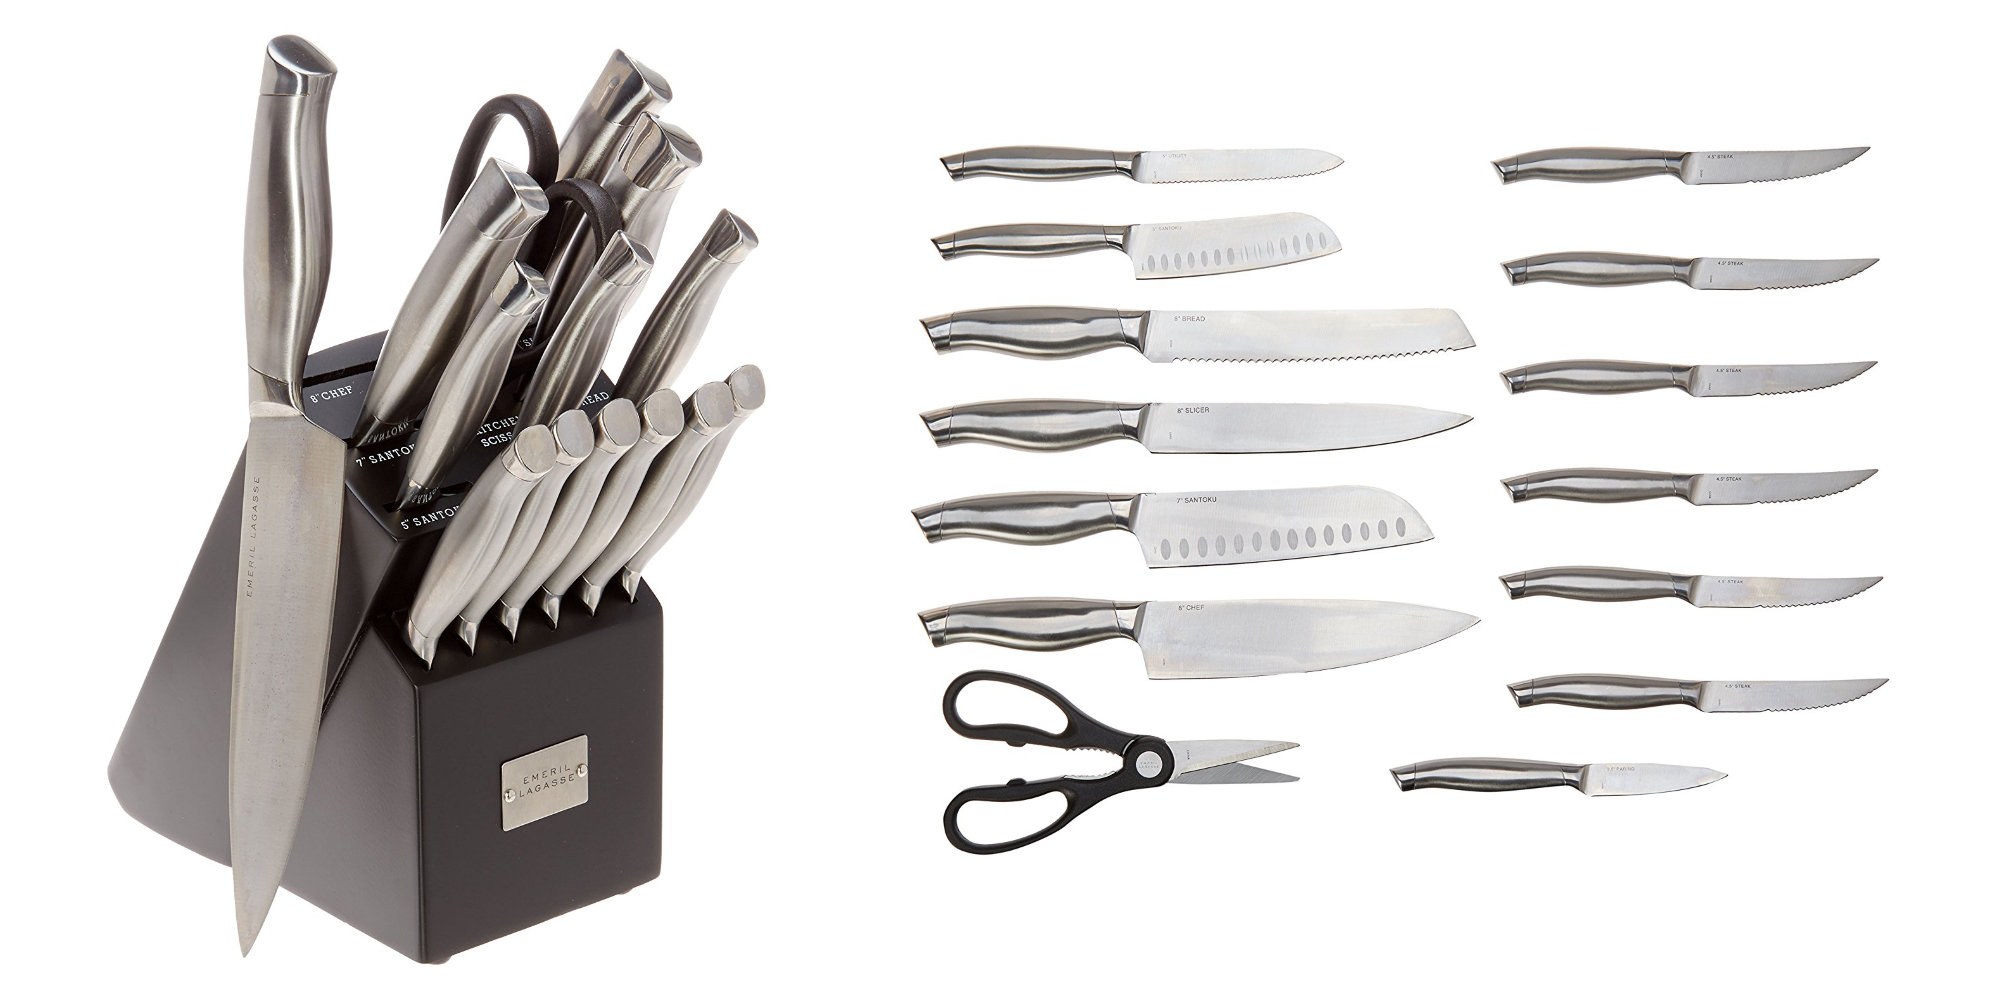 https://9to5toys.com/wp-content/uploads/sites/5/2018/06/emeril-15-pc-stainless-steel-cutlery-set.jpg